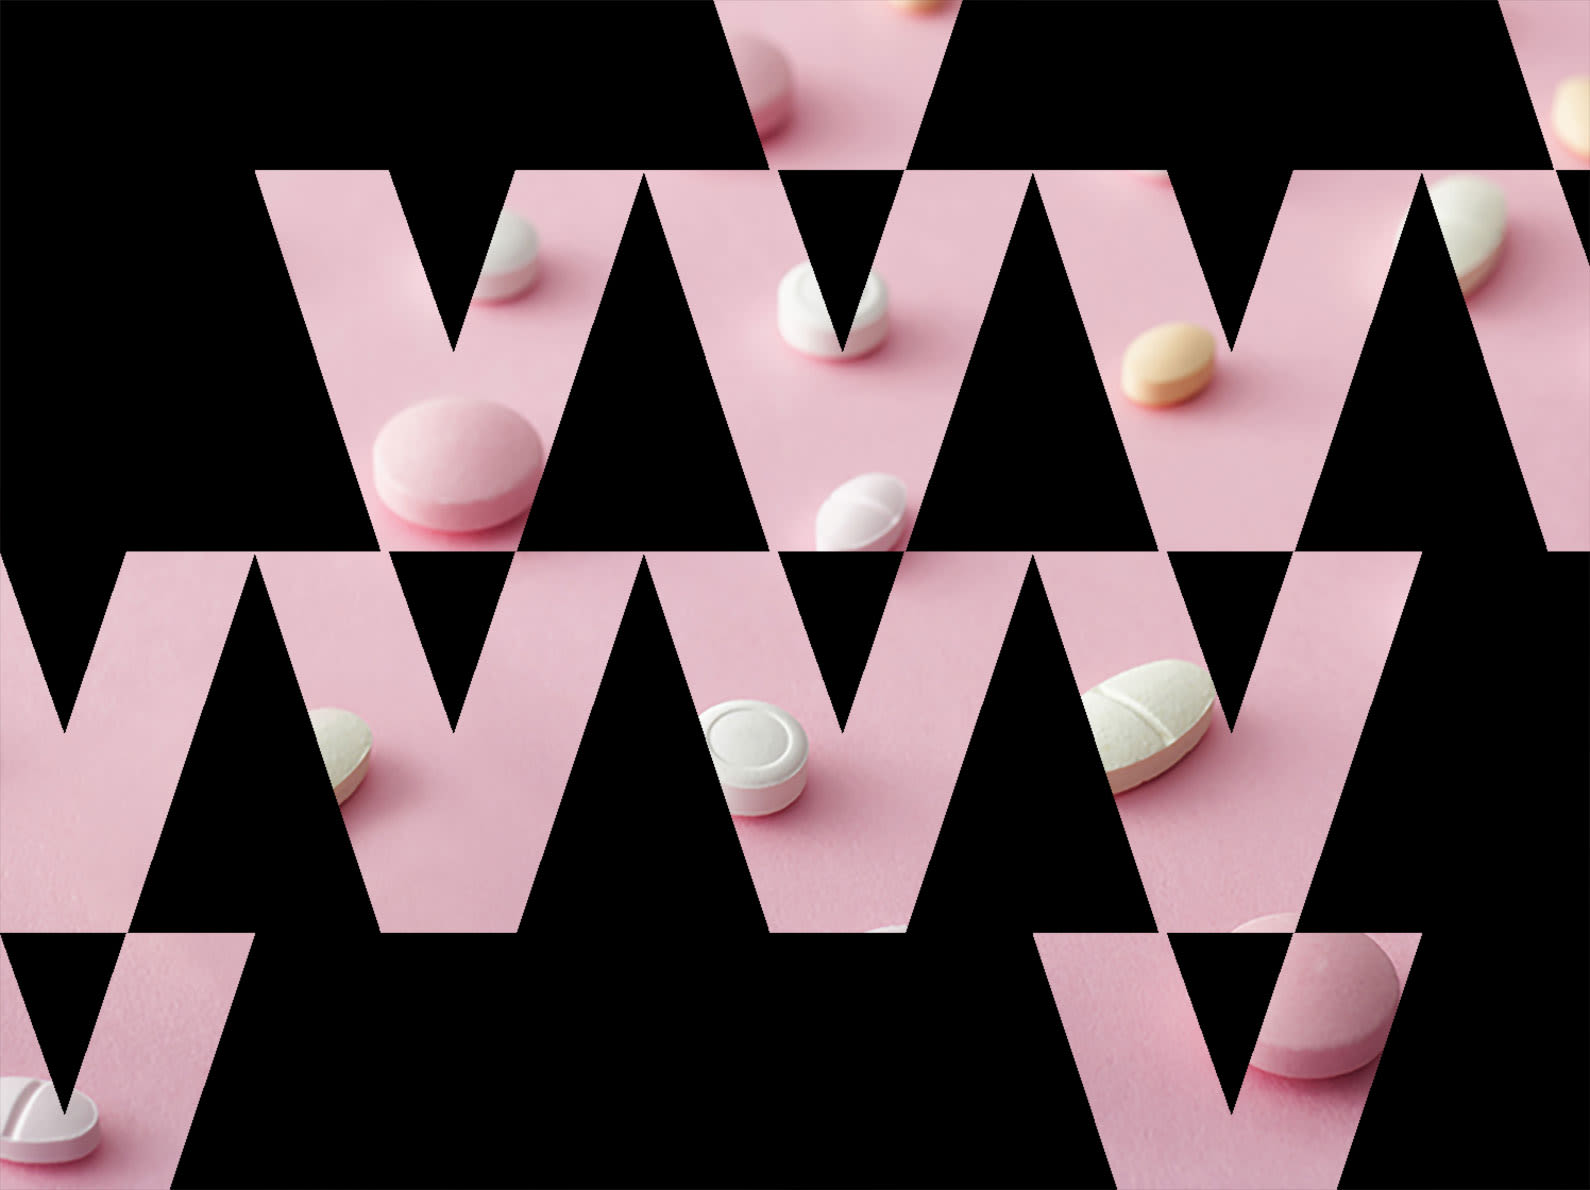 Pills on pink background with V pattern overlay